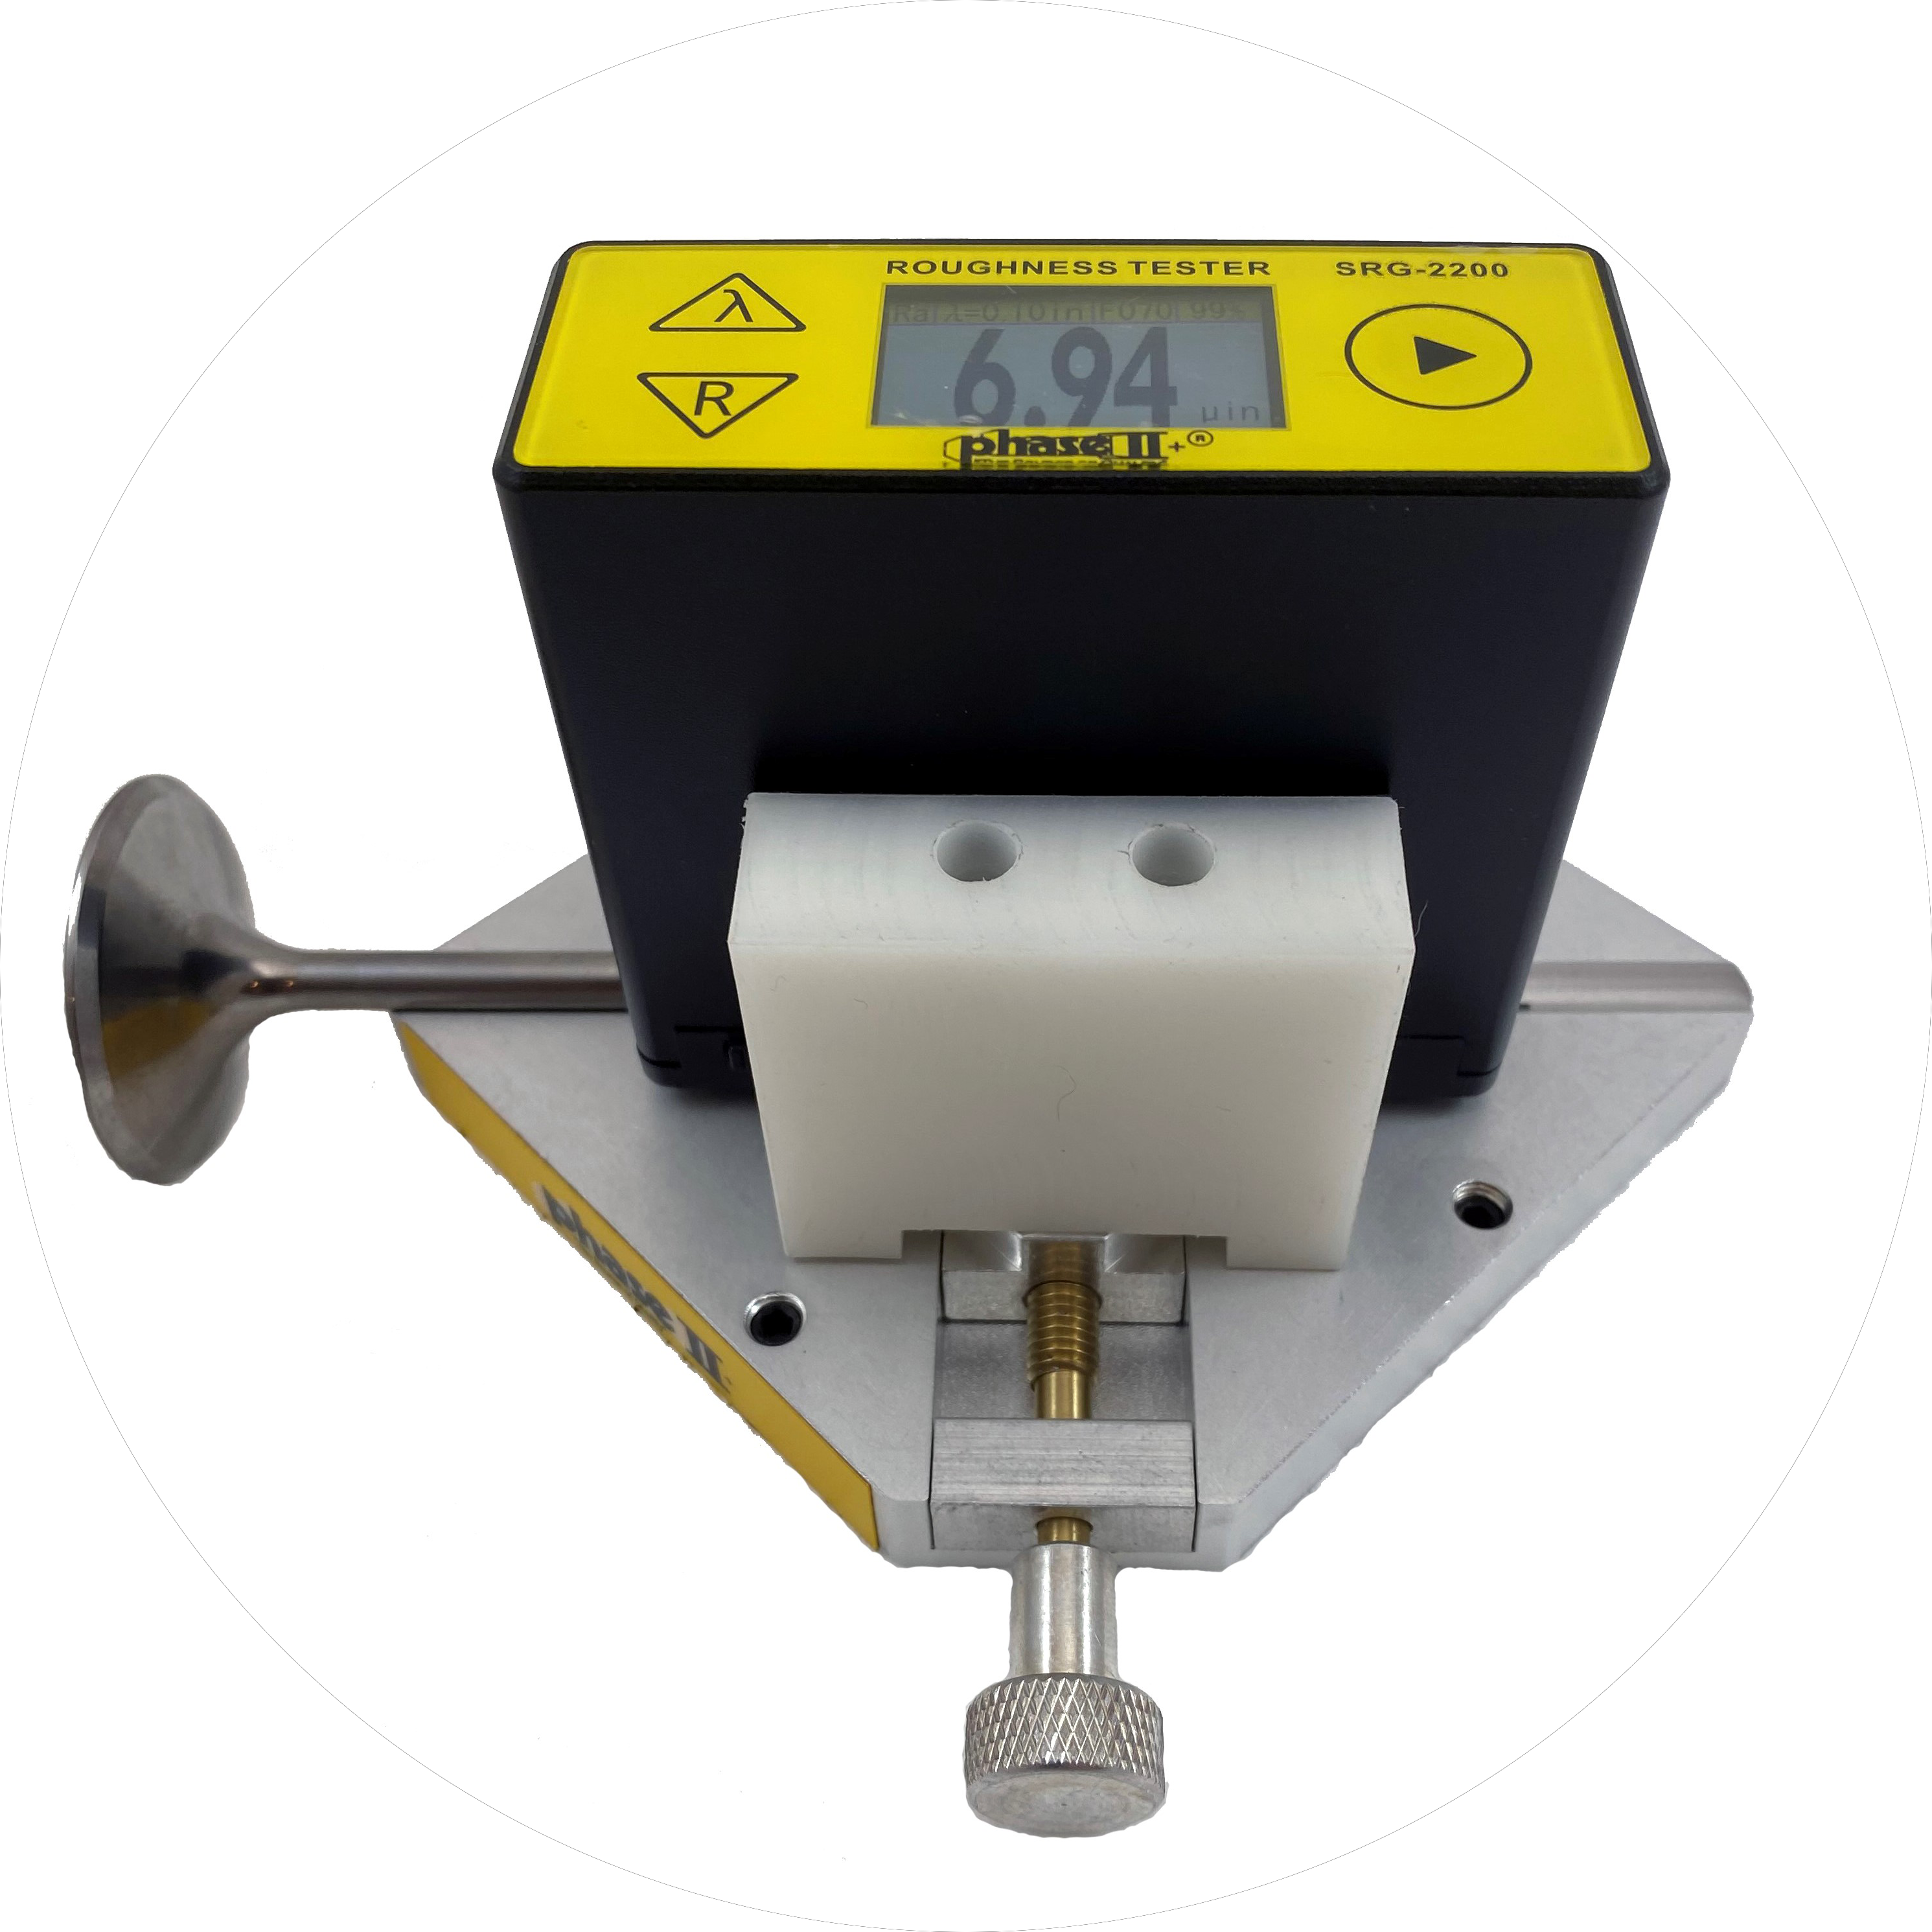 PORTABLE SURFACE ROUGHNESS TESTER